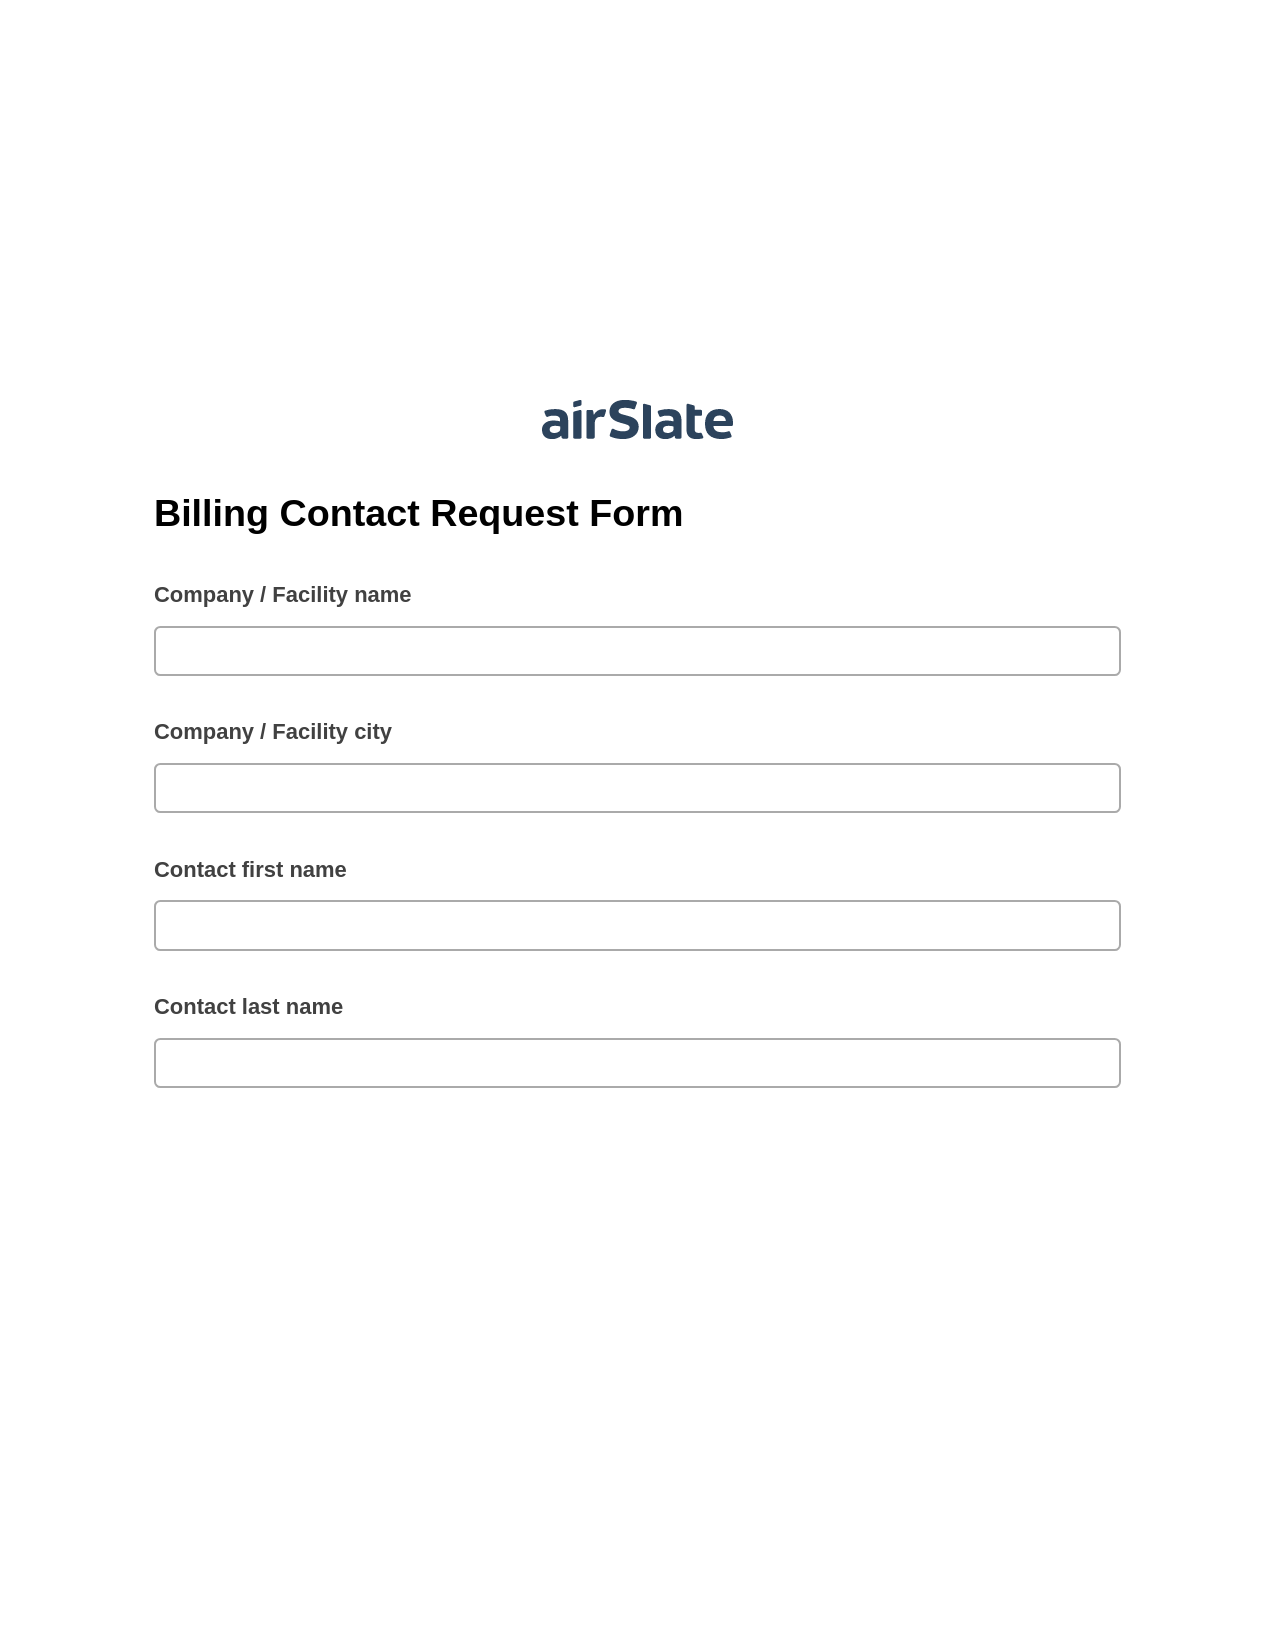 Multirole Billing Contact Request Form Pre-fill Document Bot, Reminder Bot, Email Notification Postfinish Bot